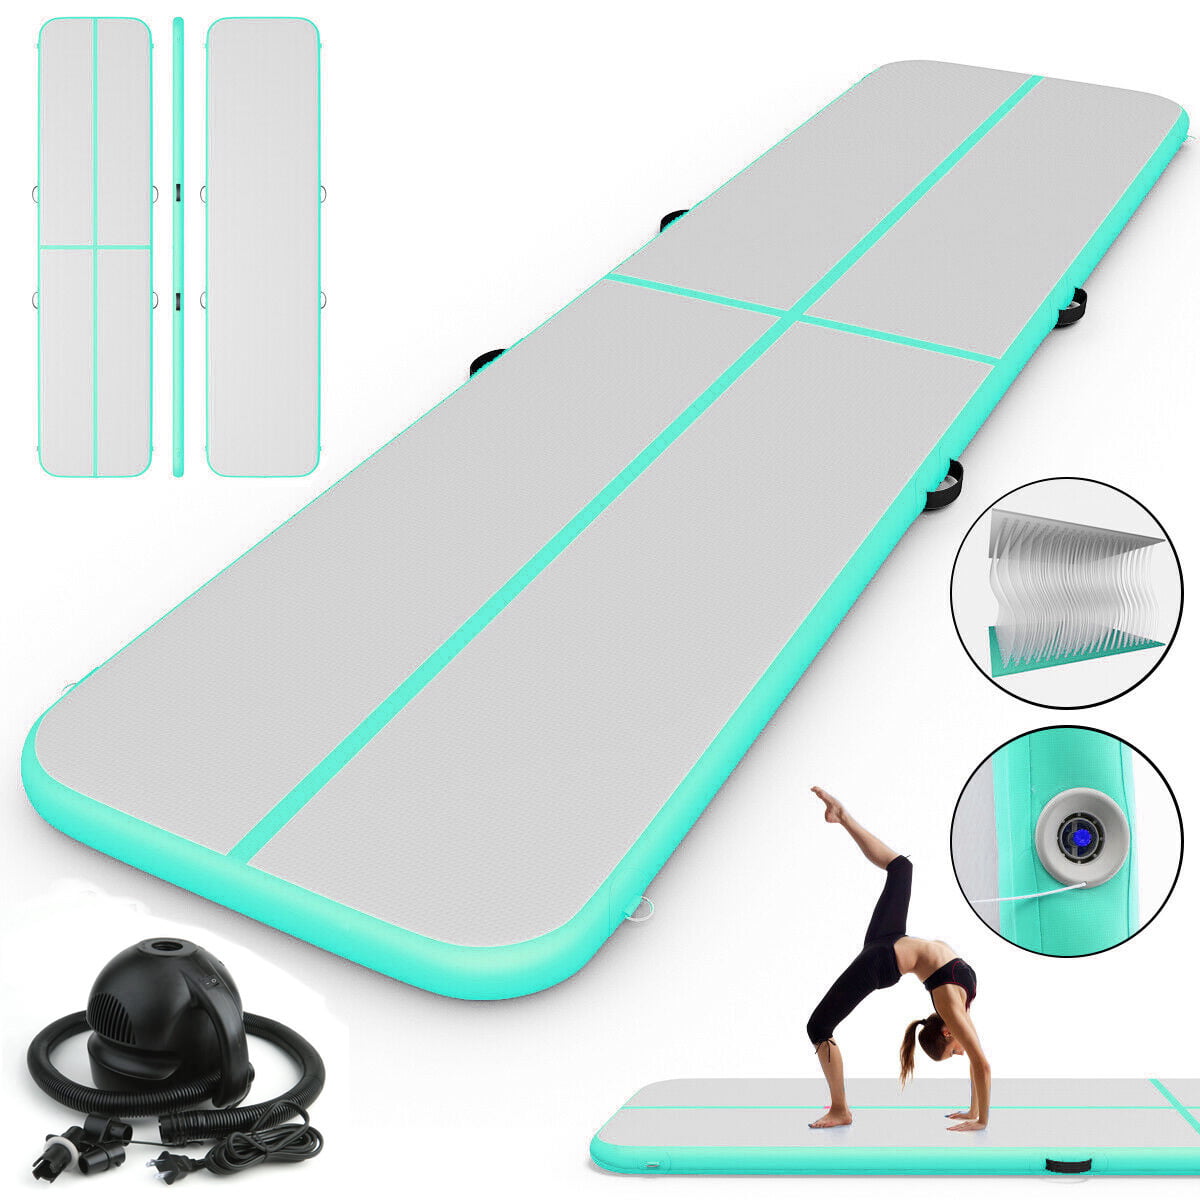 10FT Air track Inflatable Floor Home Gymnastics Tumbling Mat GYM W.Pump Gift US